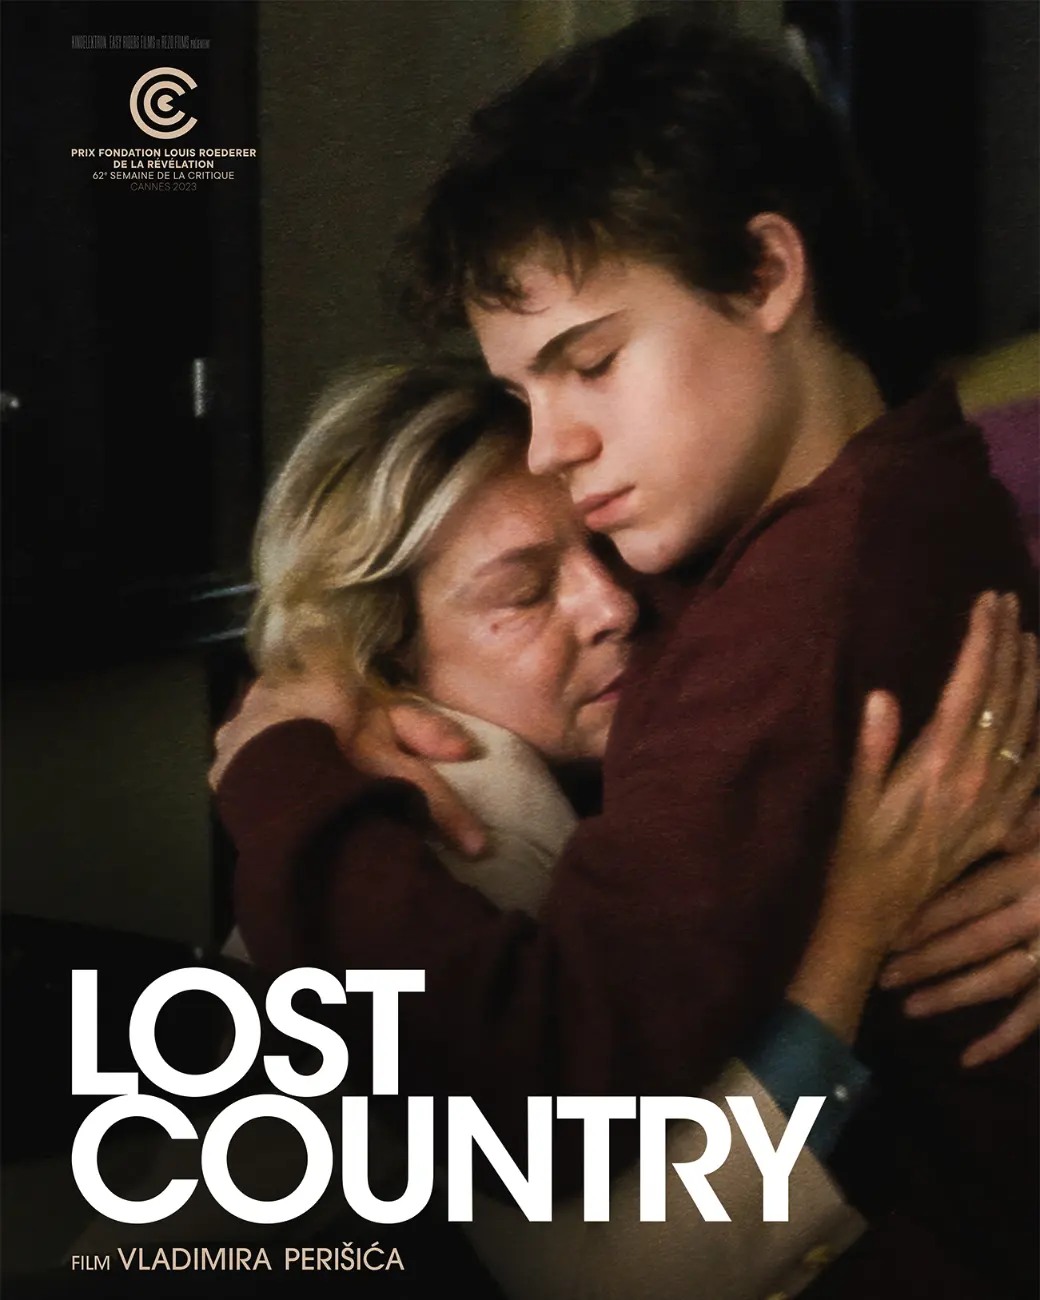 LOST COUNTRY